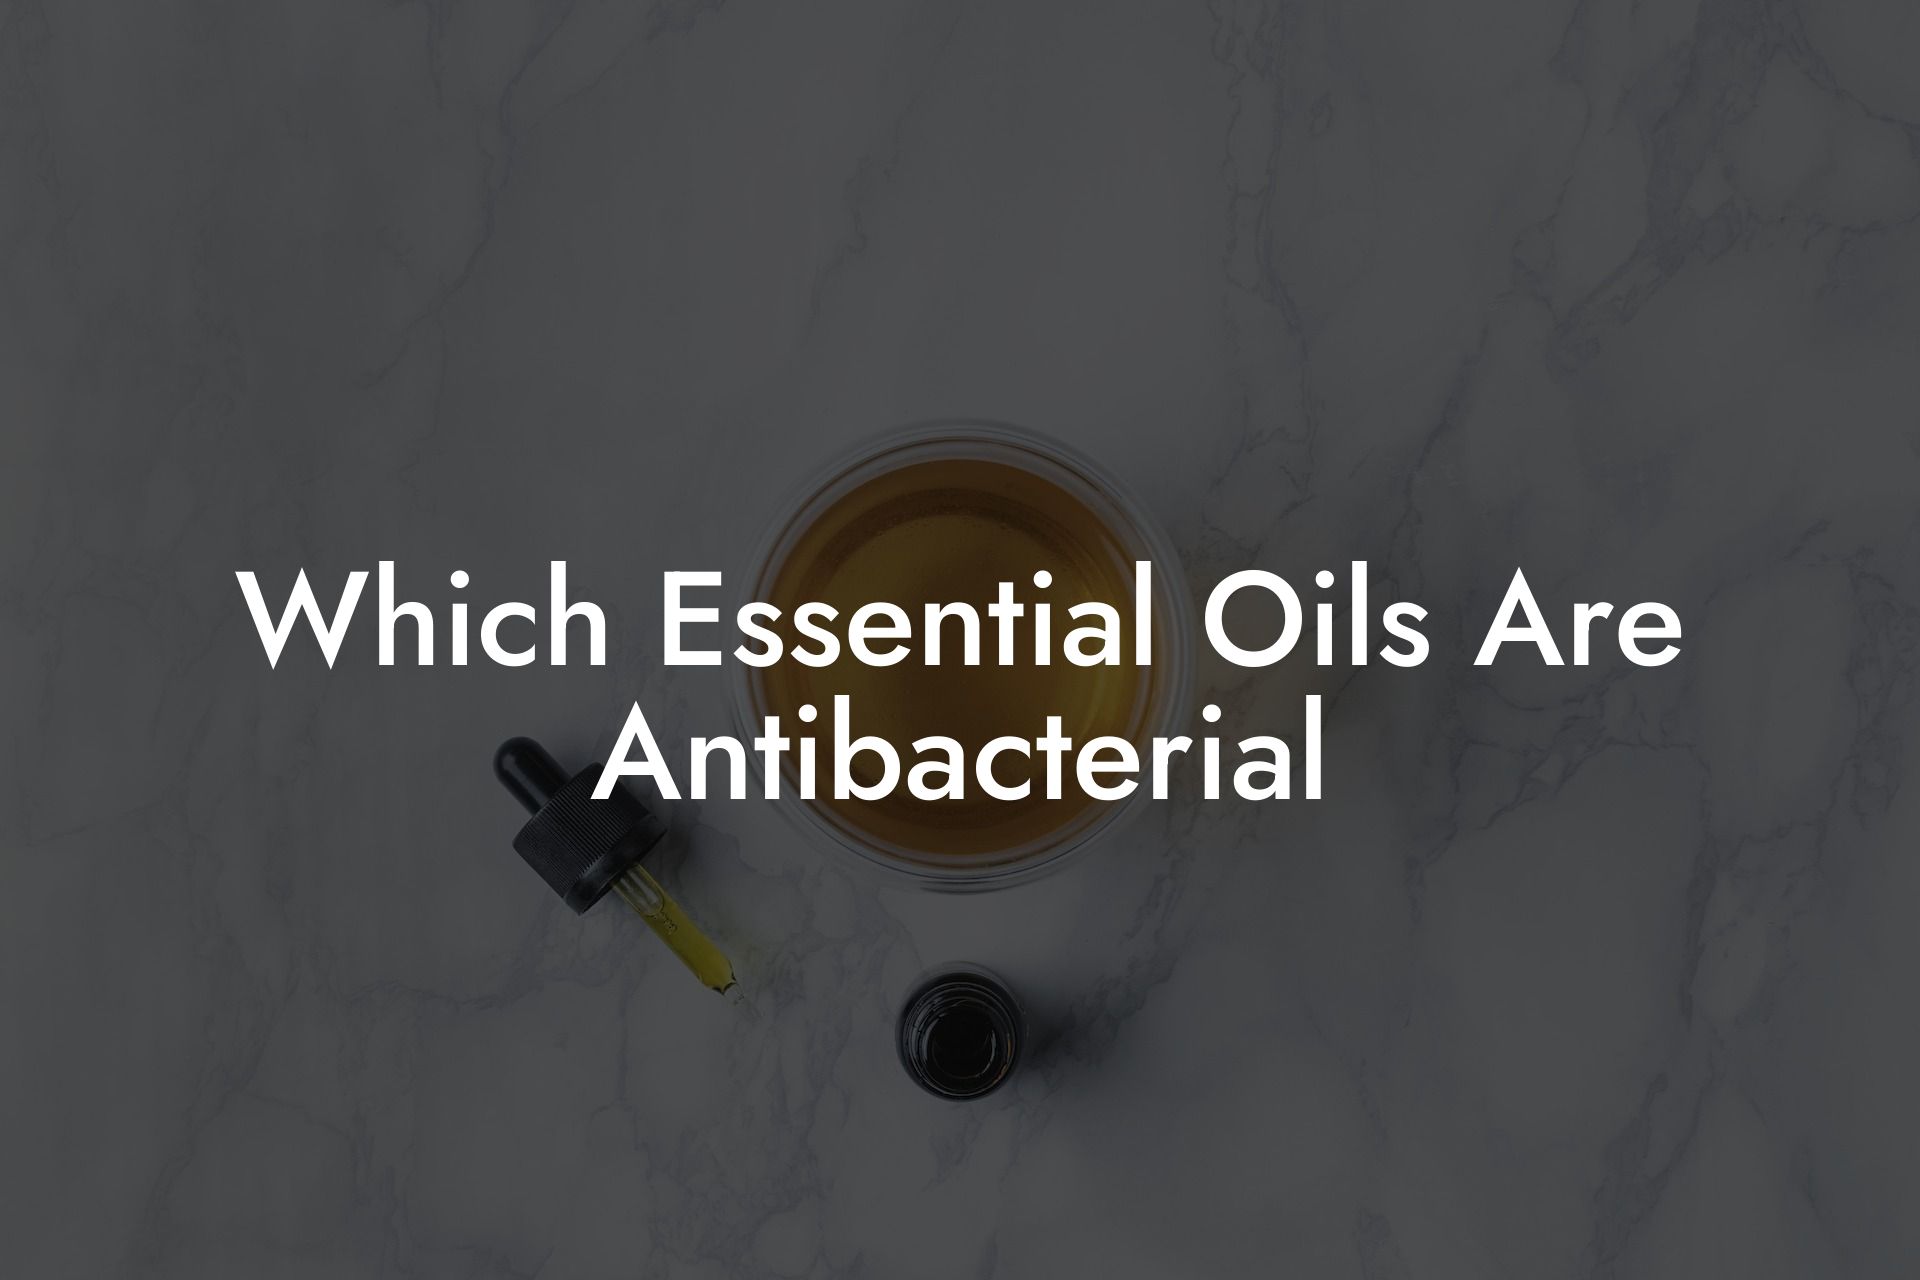 Which Essential Oils Are Antibacterial